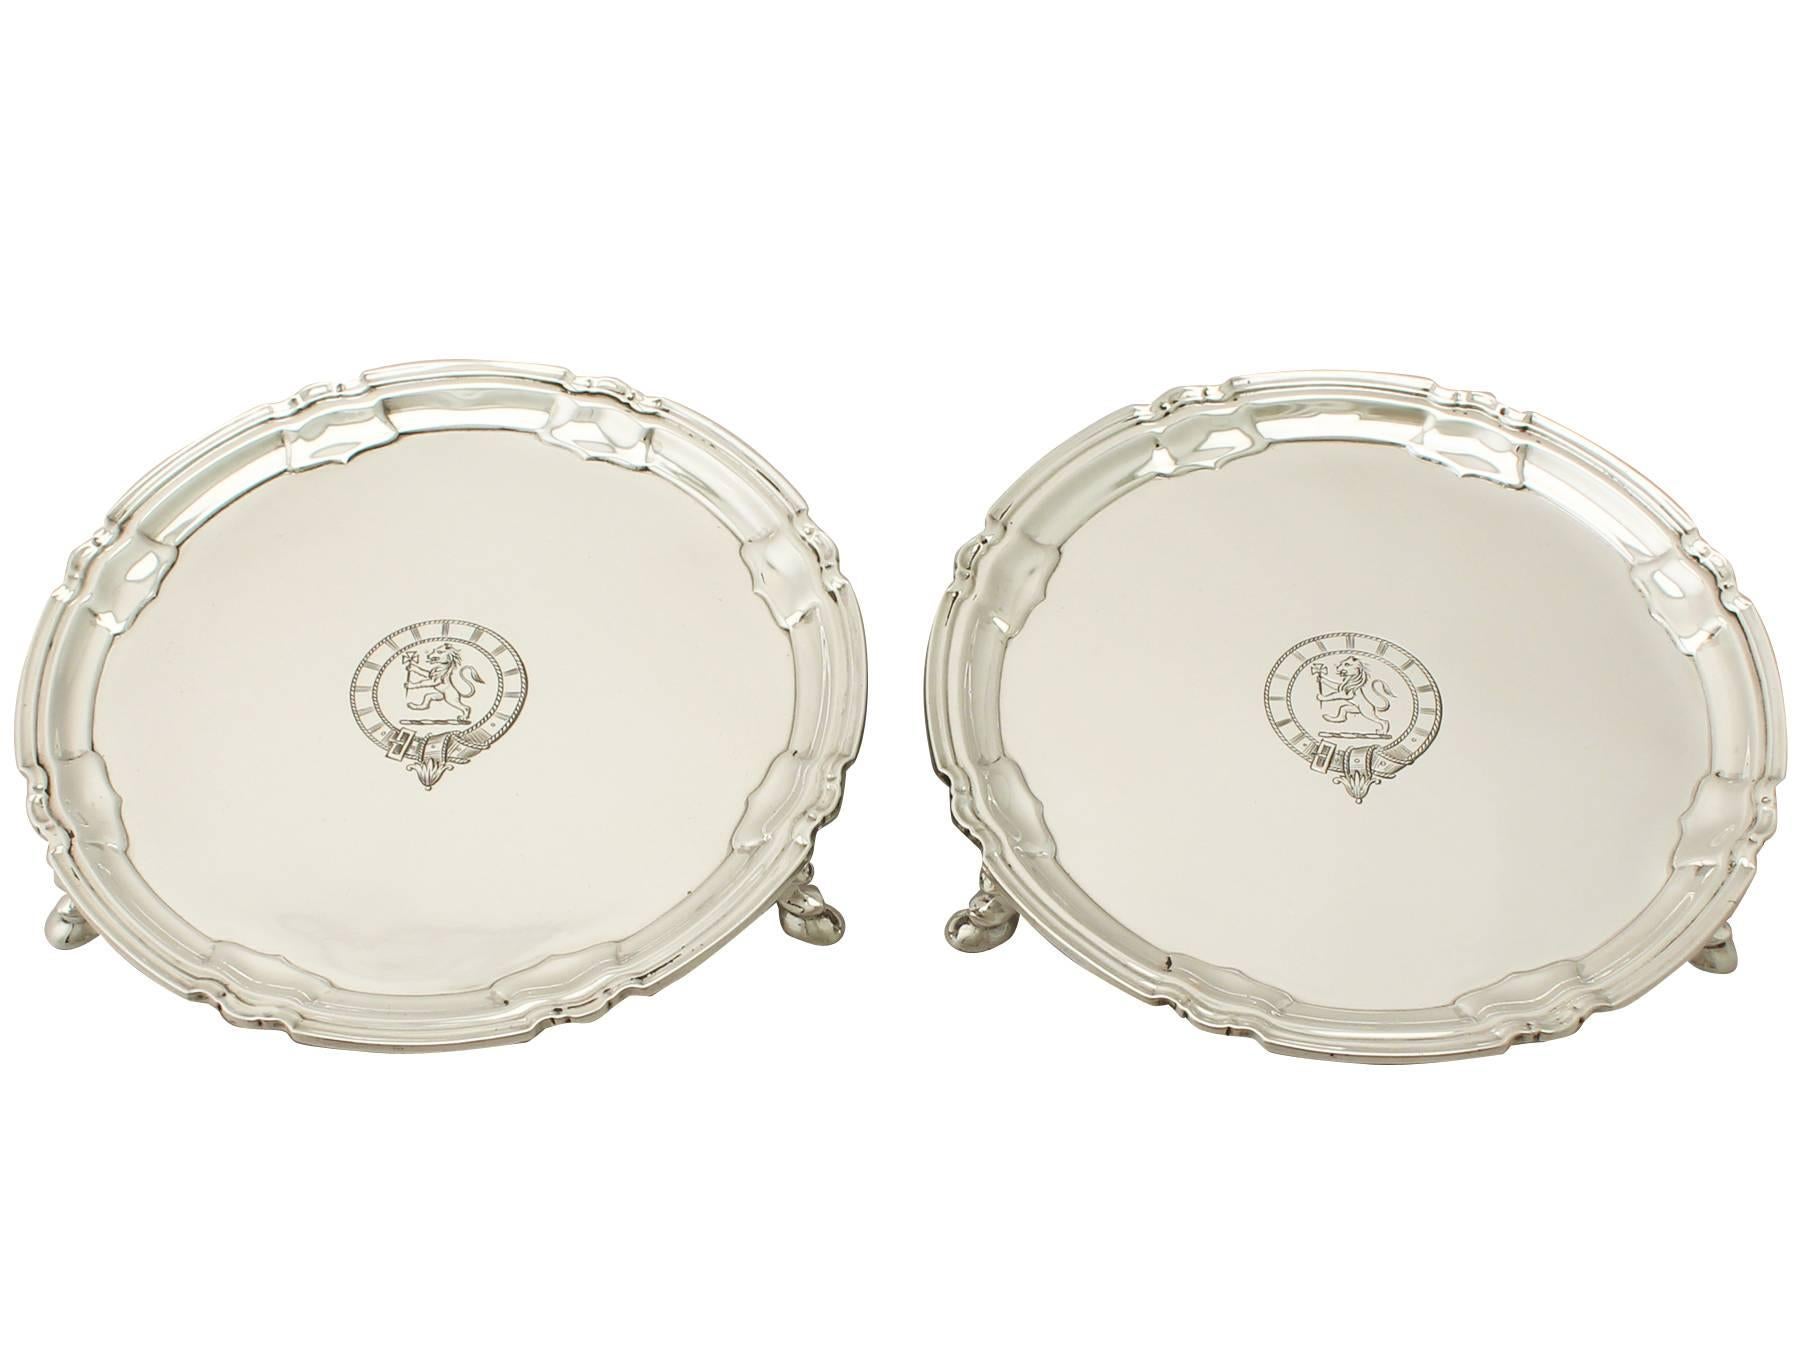 A fine and impressive pair of antique George V English sterling silver waiters; an addition to our silver tray, salver and platter collection.
These fine antique George II sterling silver waiters have a circular shaped form.

The plain surface of